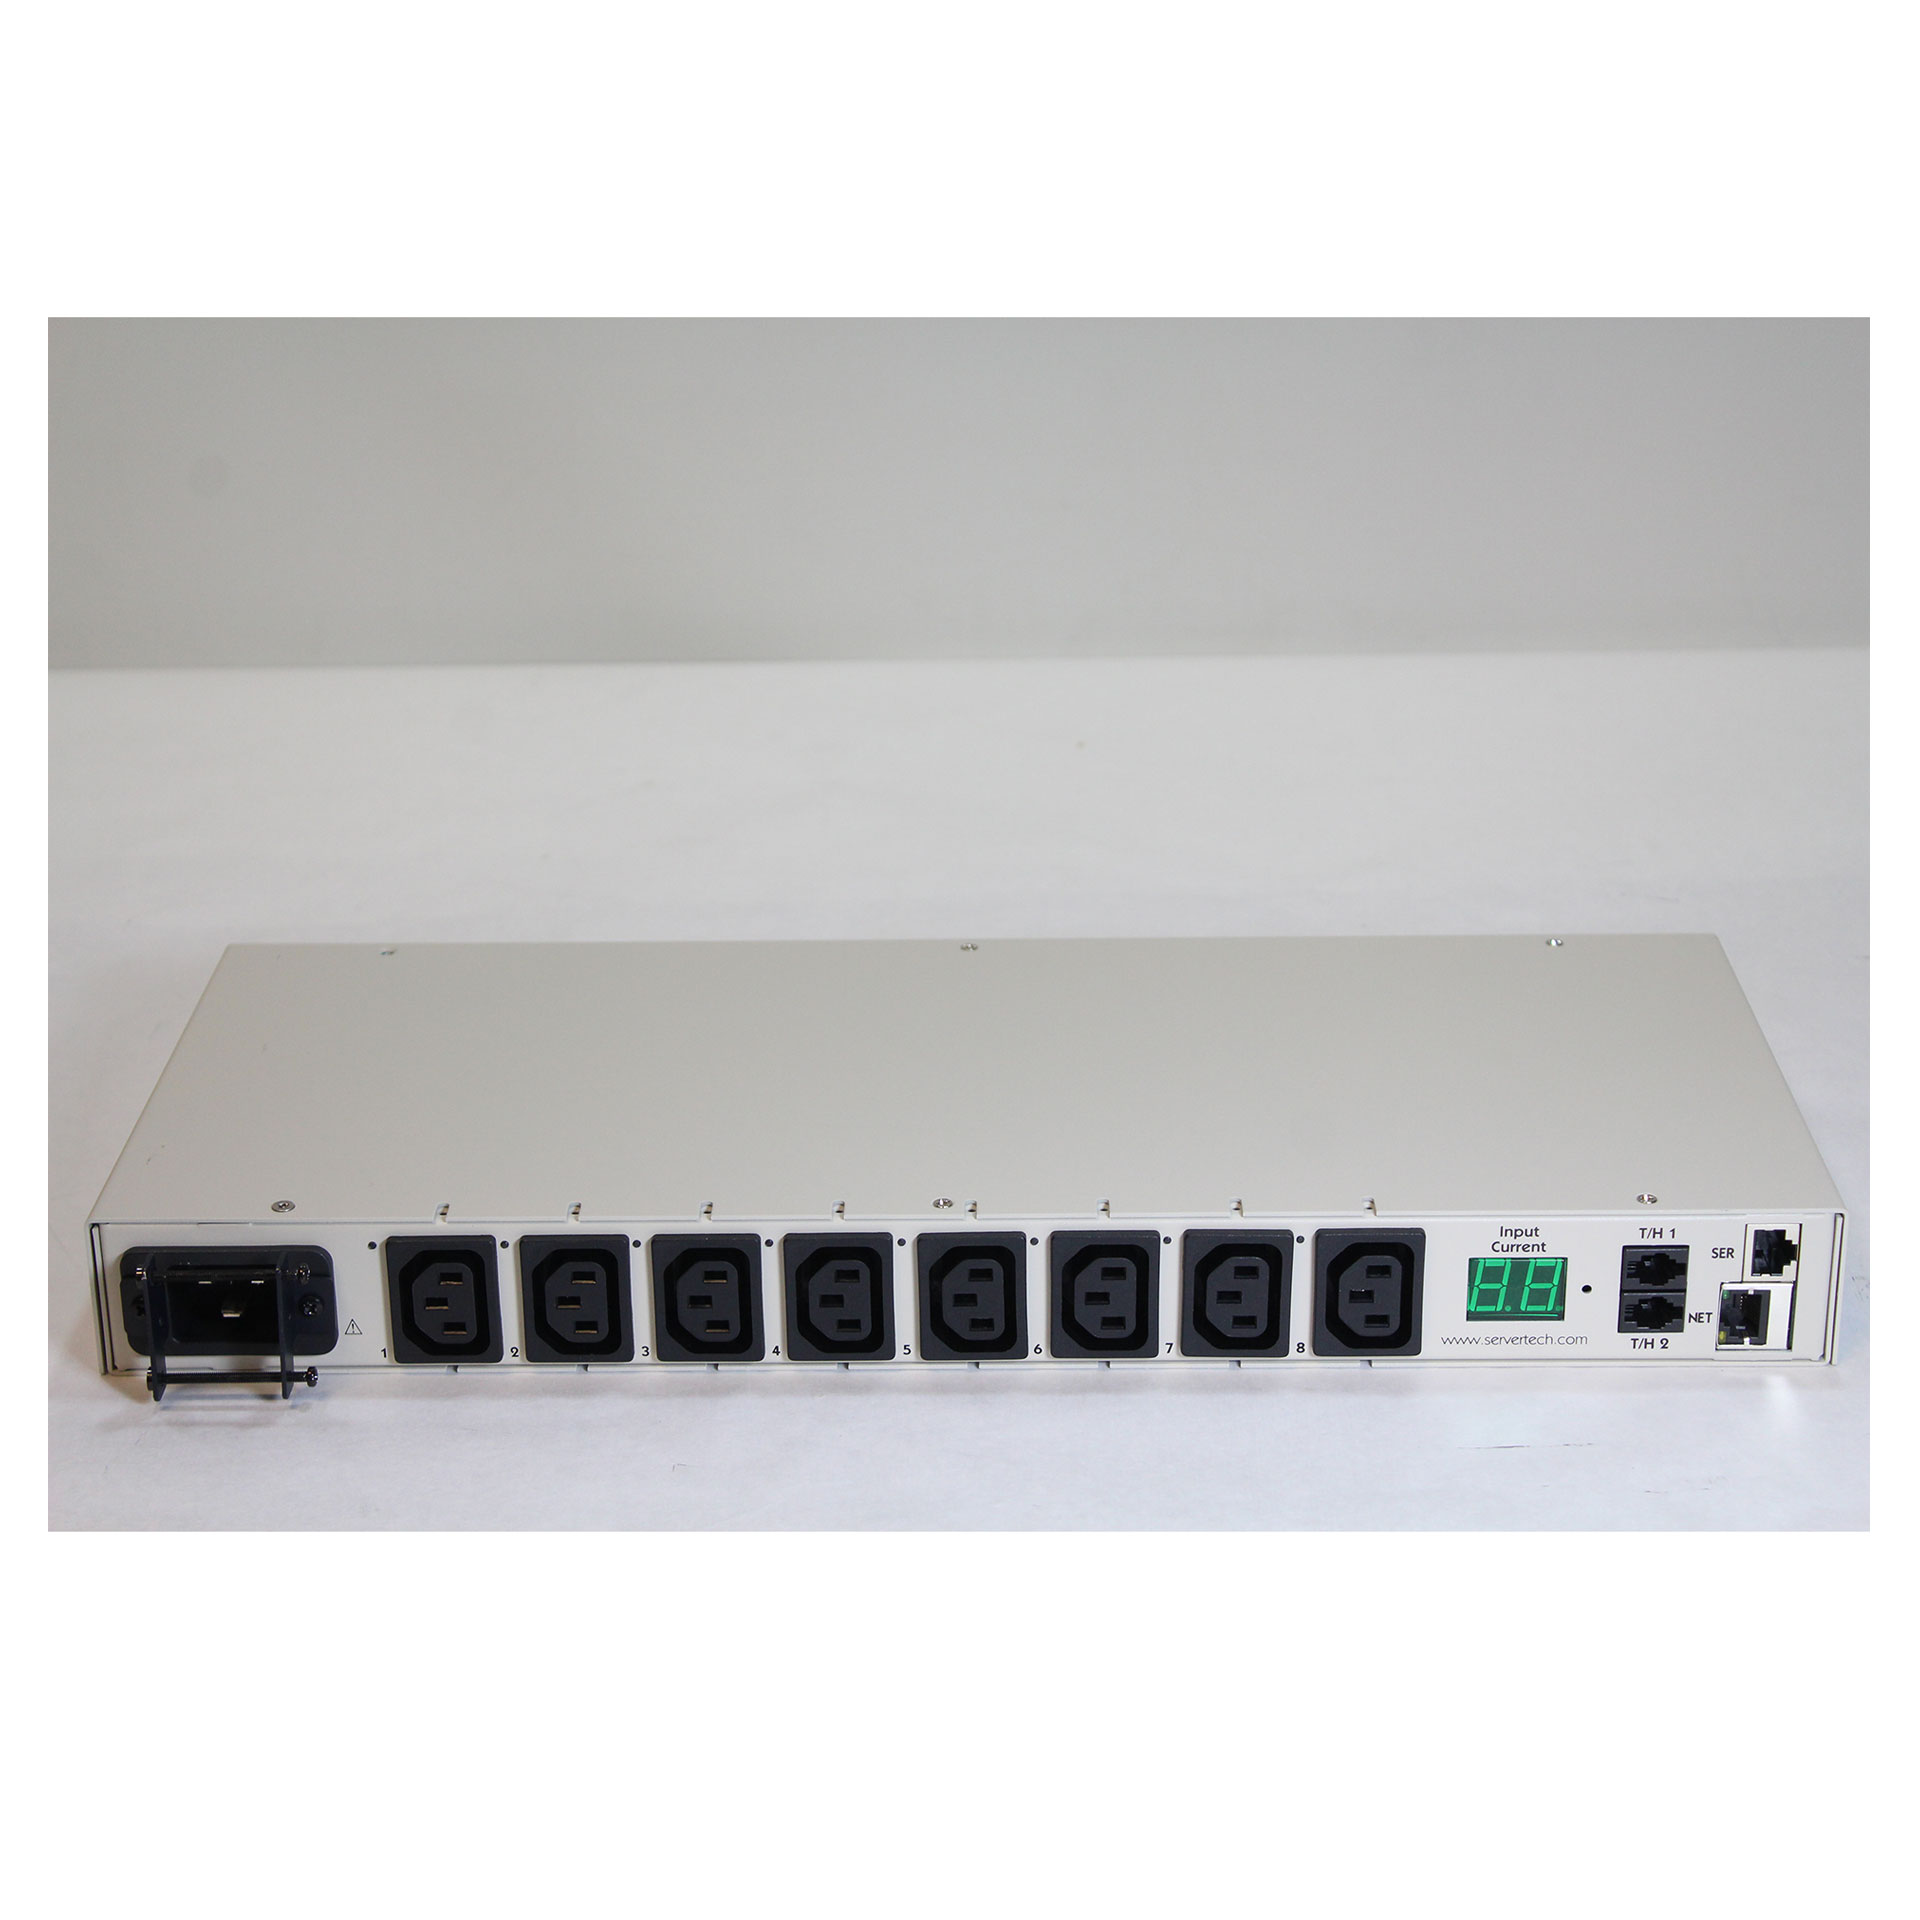 Server Technology Sentry Switched CDU CW-8H2-C20 Power Control